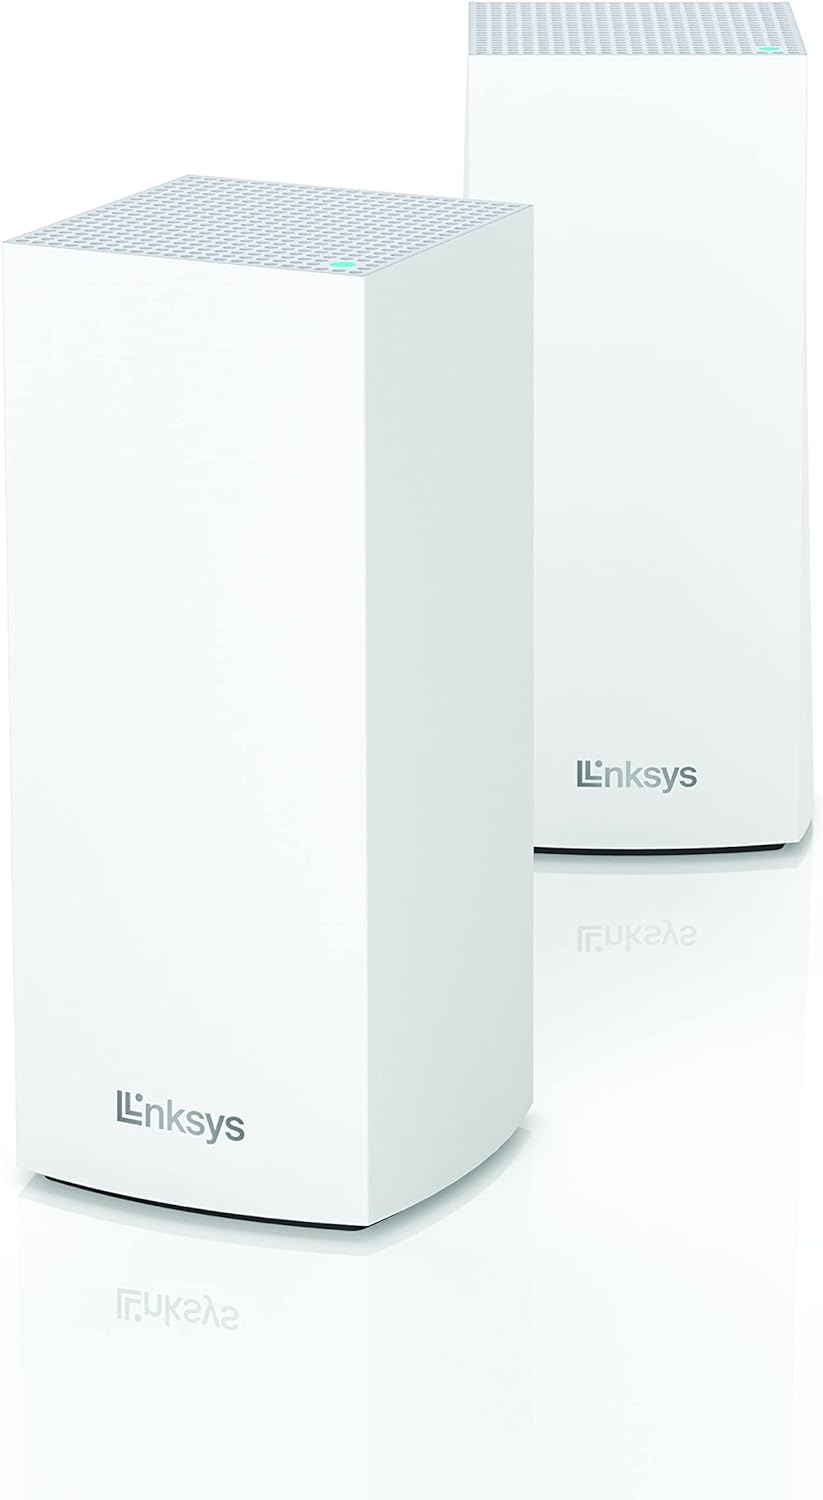 Limited-time deal: Linksys MX8000 Mesh WiFi Router - AX4000 WiFi 6 Router - Velop Tri-Band WiFi Mesh Router - WiFi 6 Mesh Computer Routers For Wireless Internet - Interne - $129.00